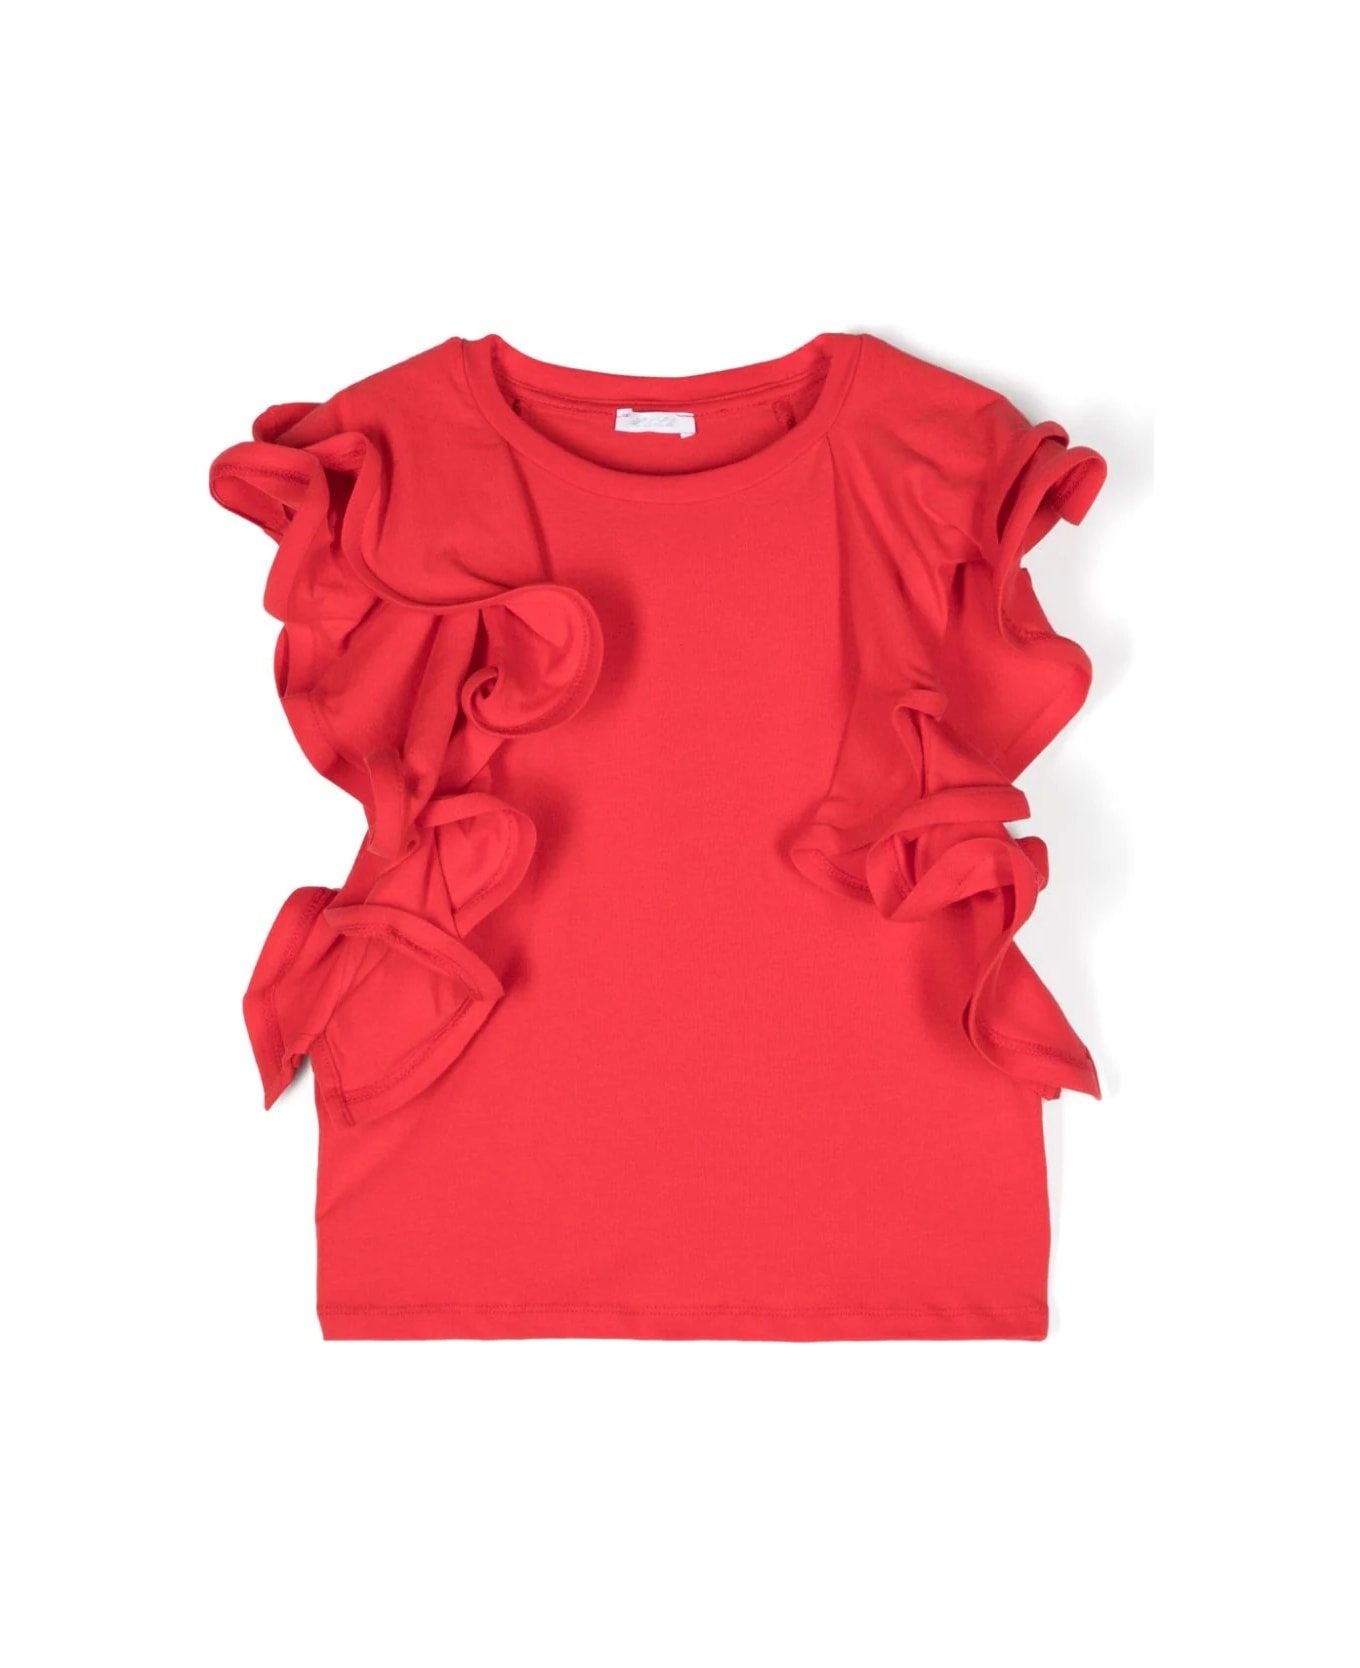 Miss Grant T-shirt Con Ruches - Red